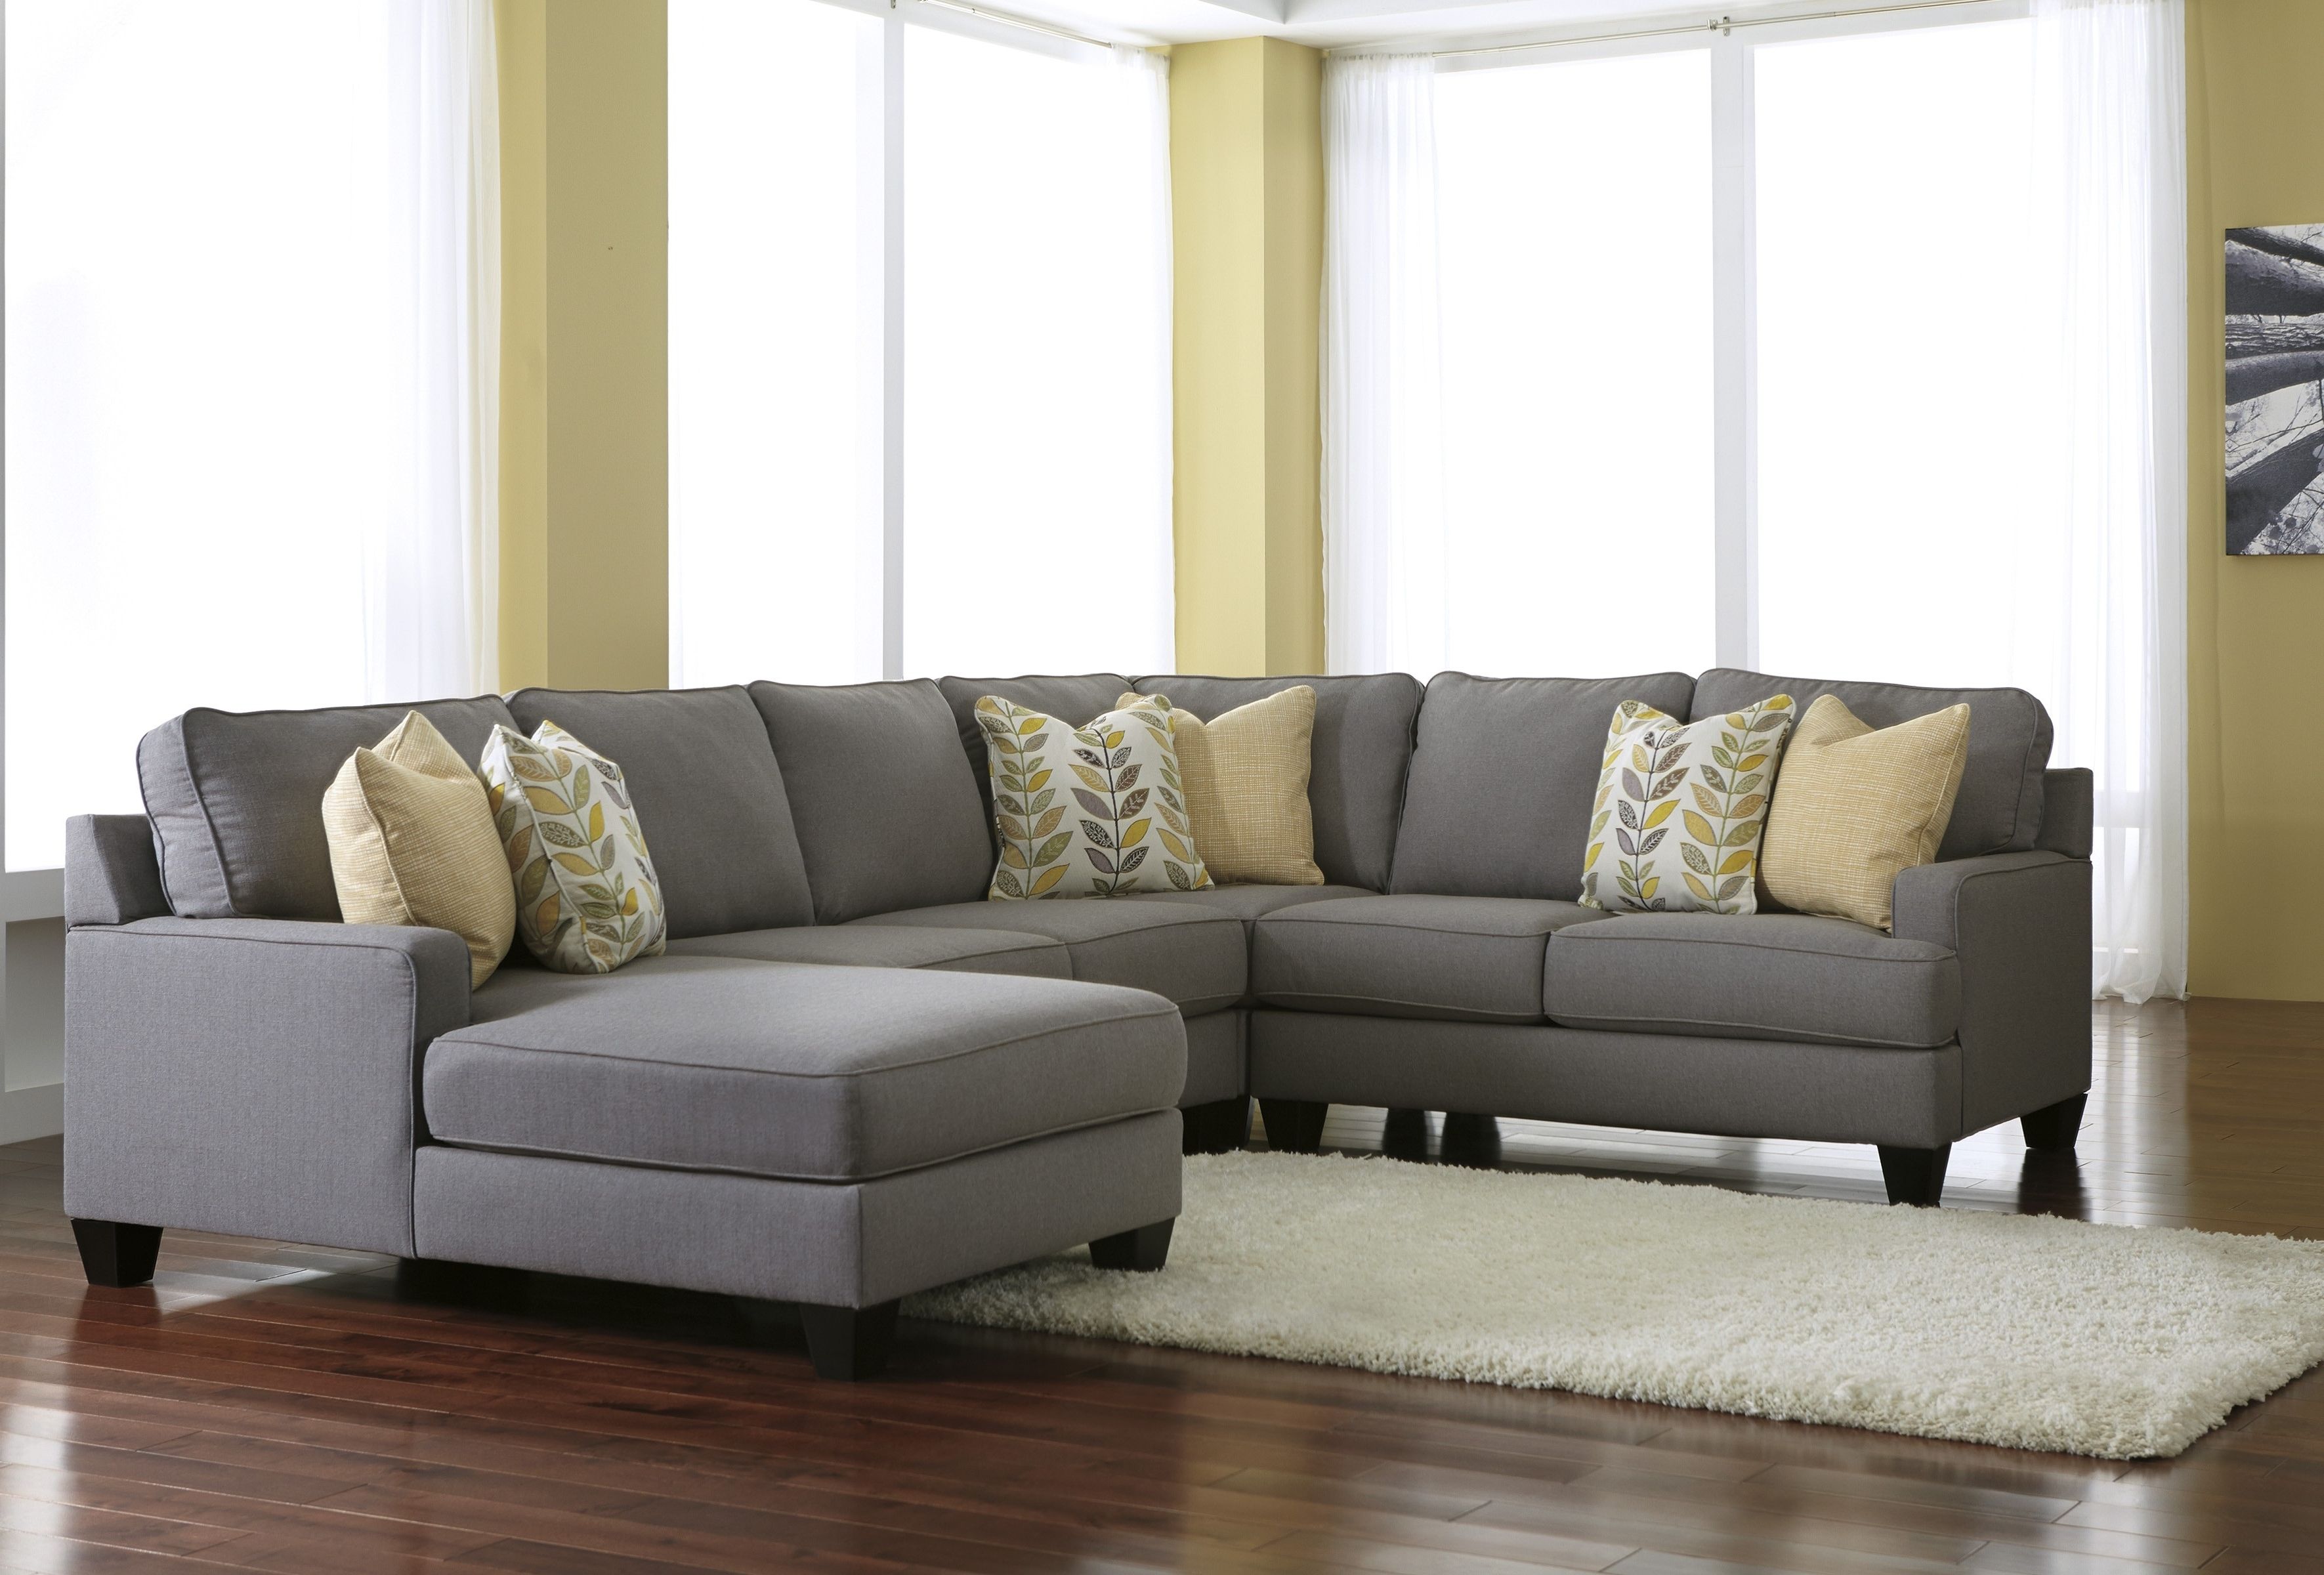 Popular Tucson Sectional Sofas With Regard To Sectional Sofas Tucson – Fjellkjeden (View 5 of 20)